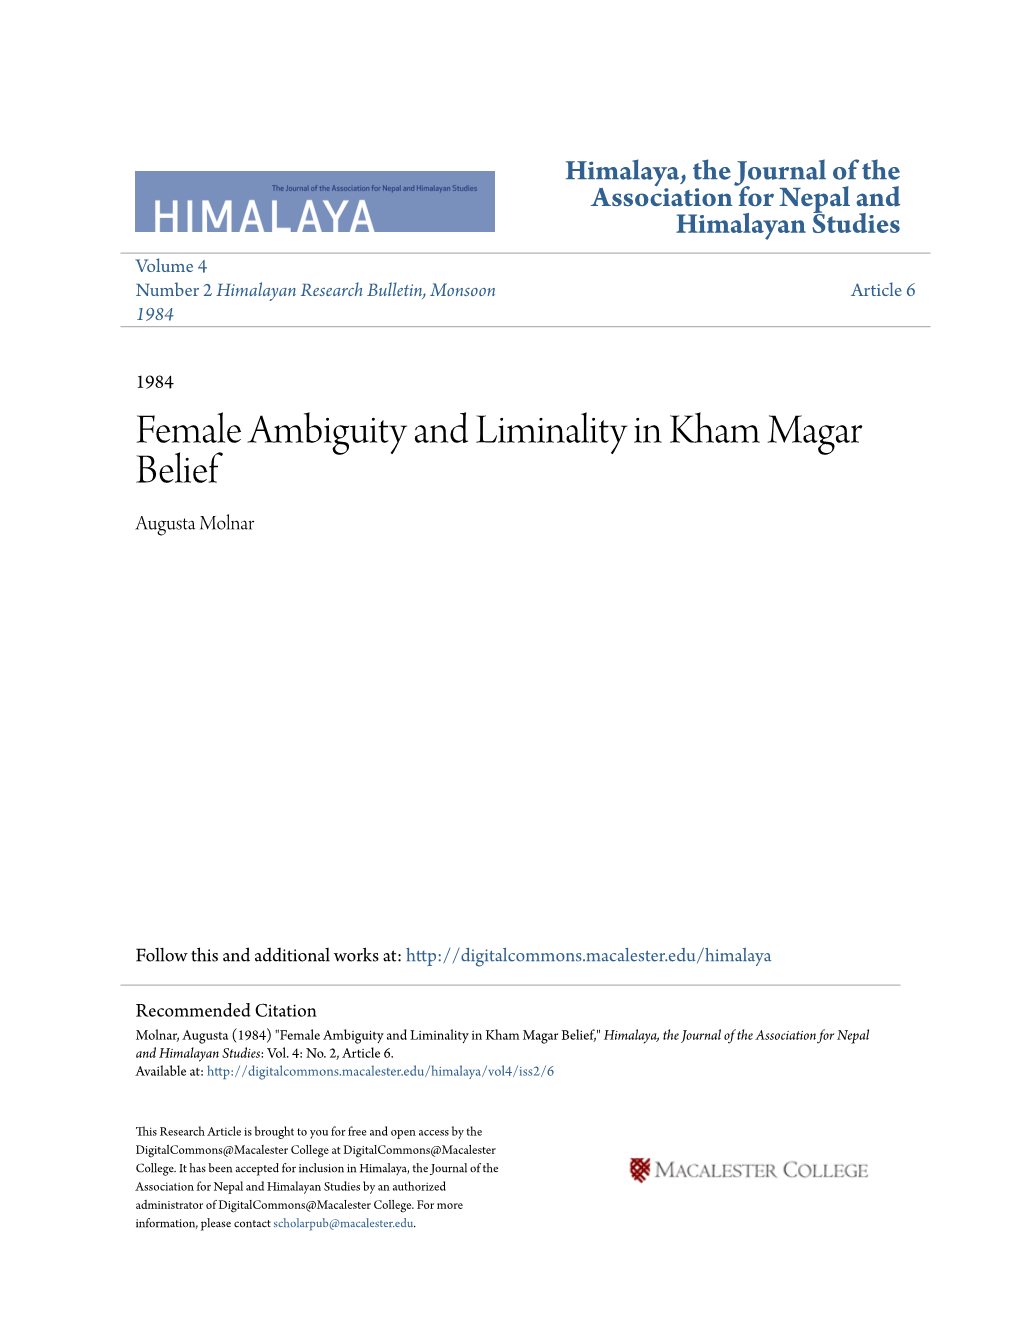 Female Ambiguity and Liminality in Kham Magar Belief Augusta Molnar